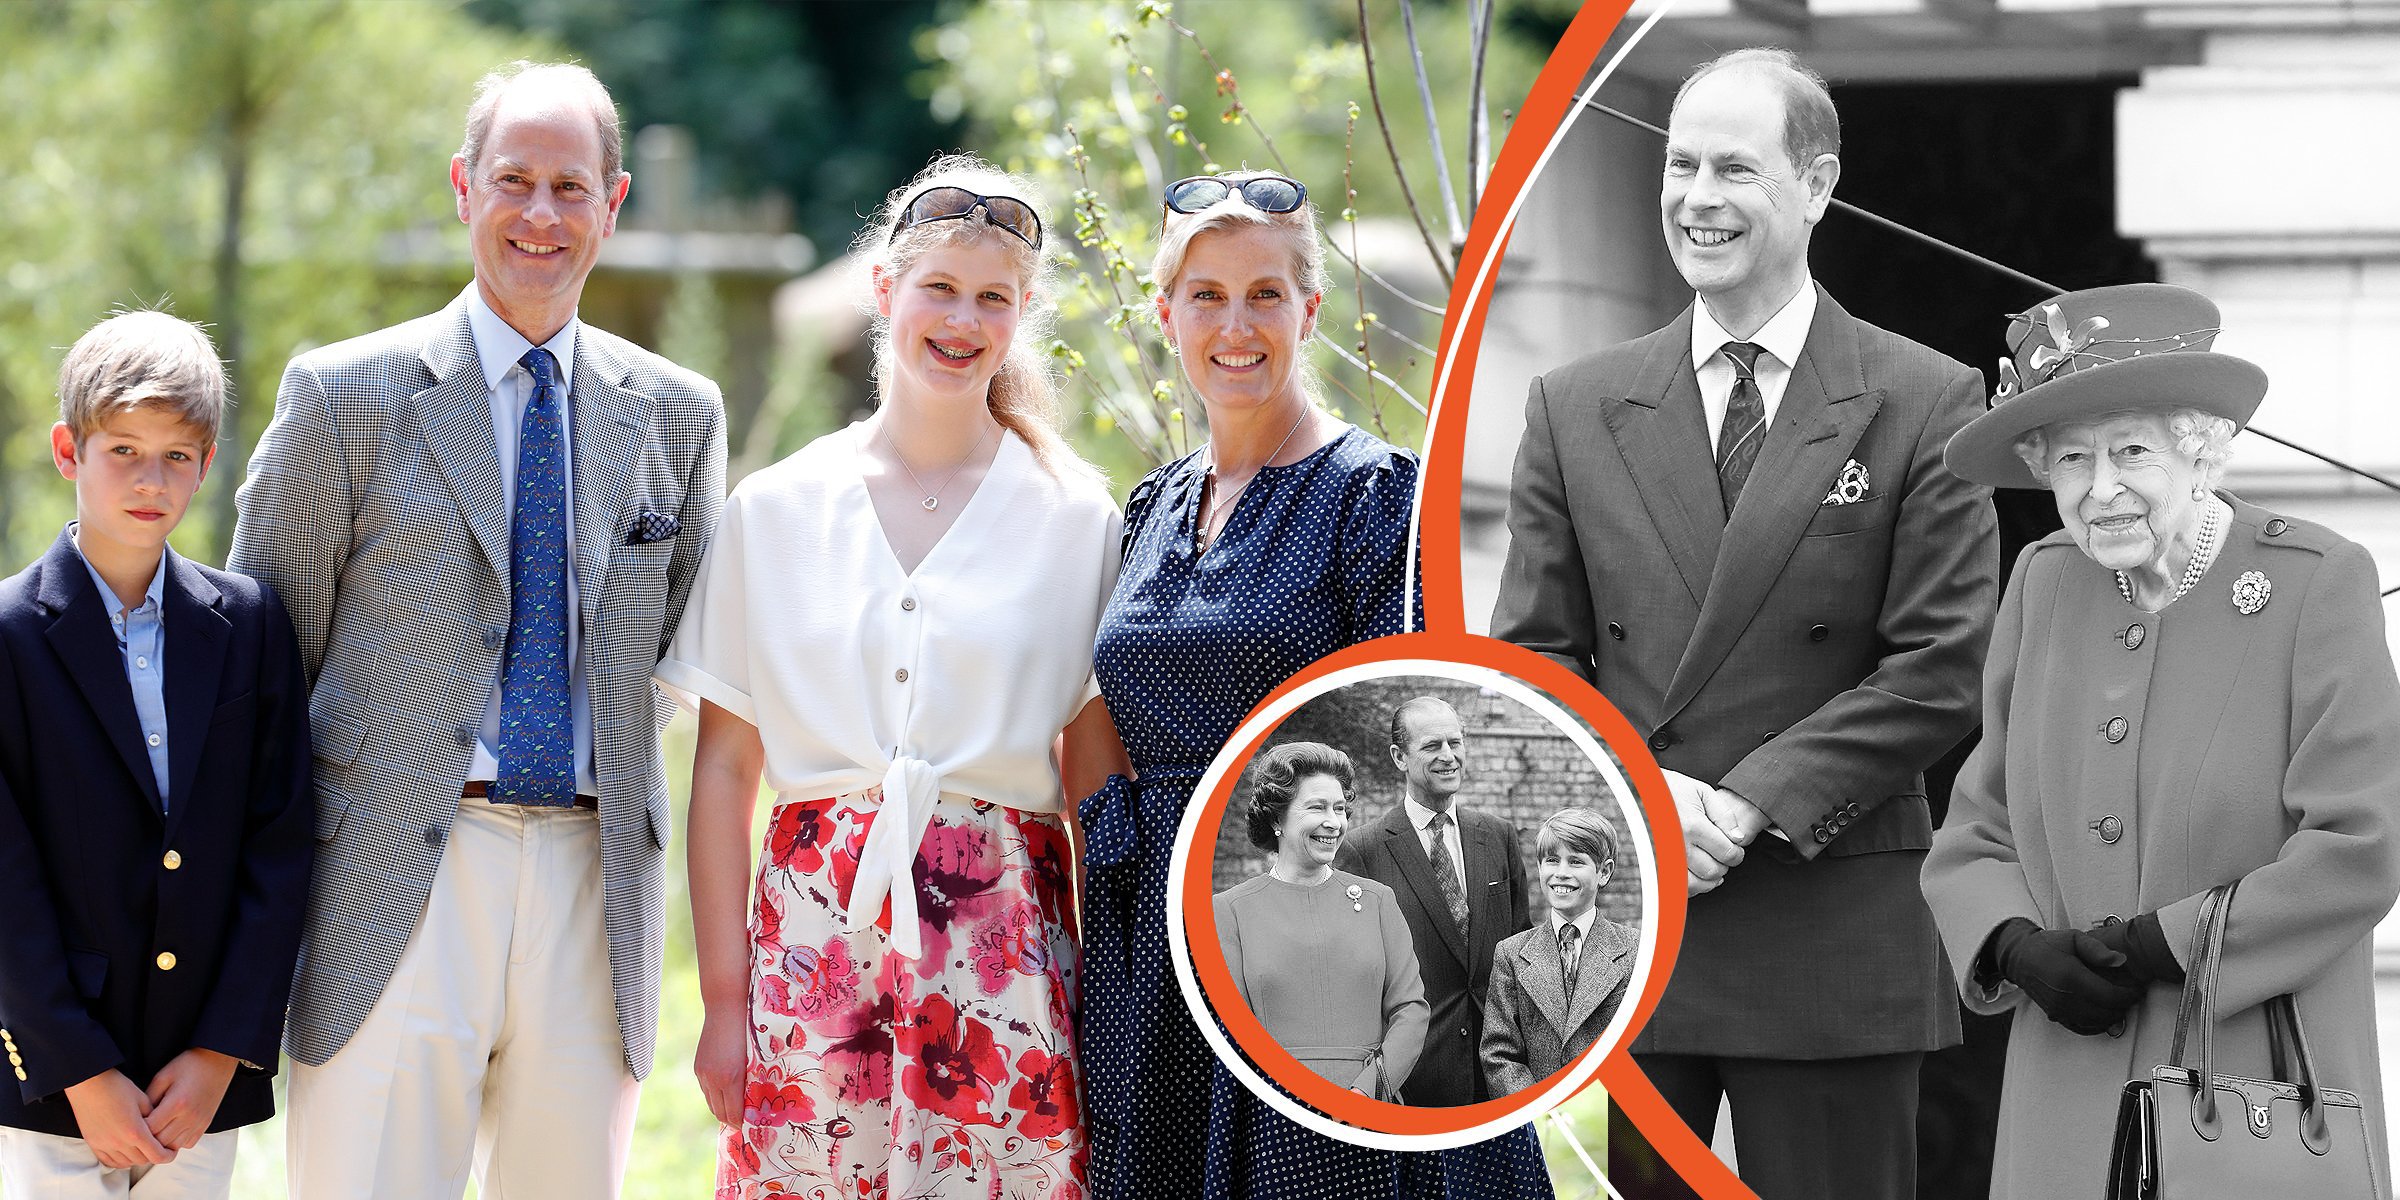 James, Viscount Severn, Prinz Edward, Earl of Wessex, Lady Louise Windsor und Sophie, Countess of Wessex | Prinz Edward, Earl of Wessex, Königin Elizabeth II. | Königin Elizabeth, Prinz Philip und ihr Sohn Prinz Edward | Quelle: Getty Images